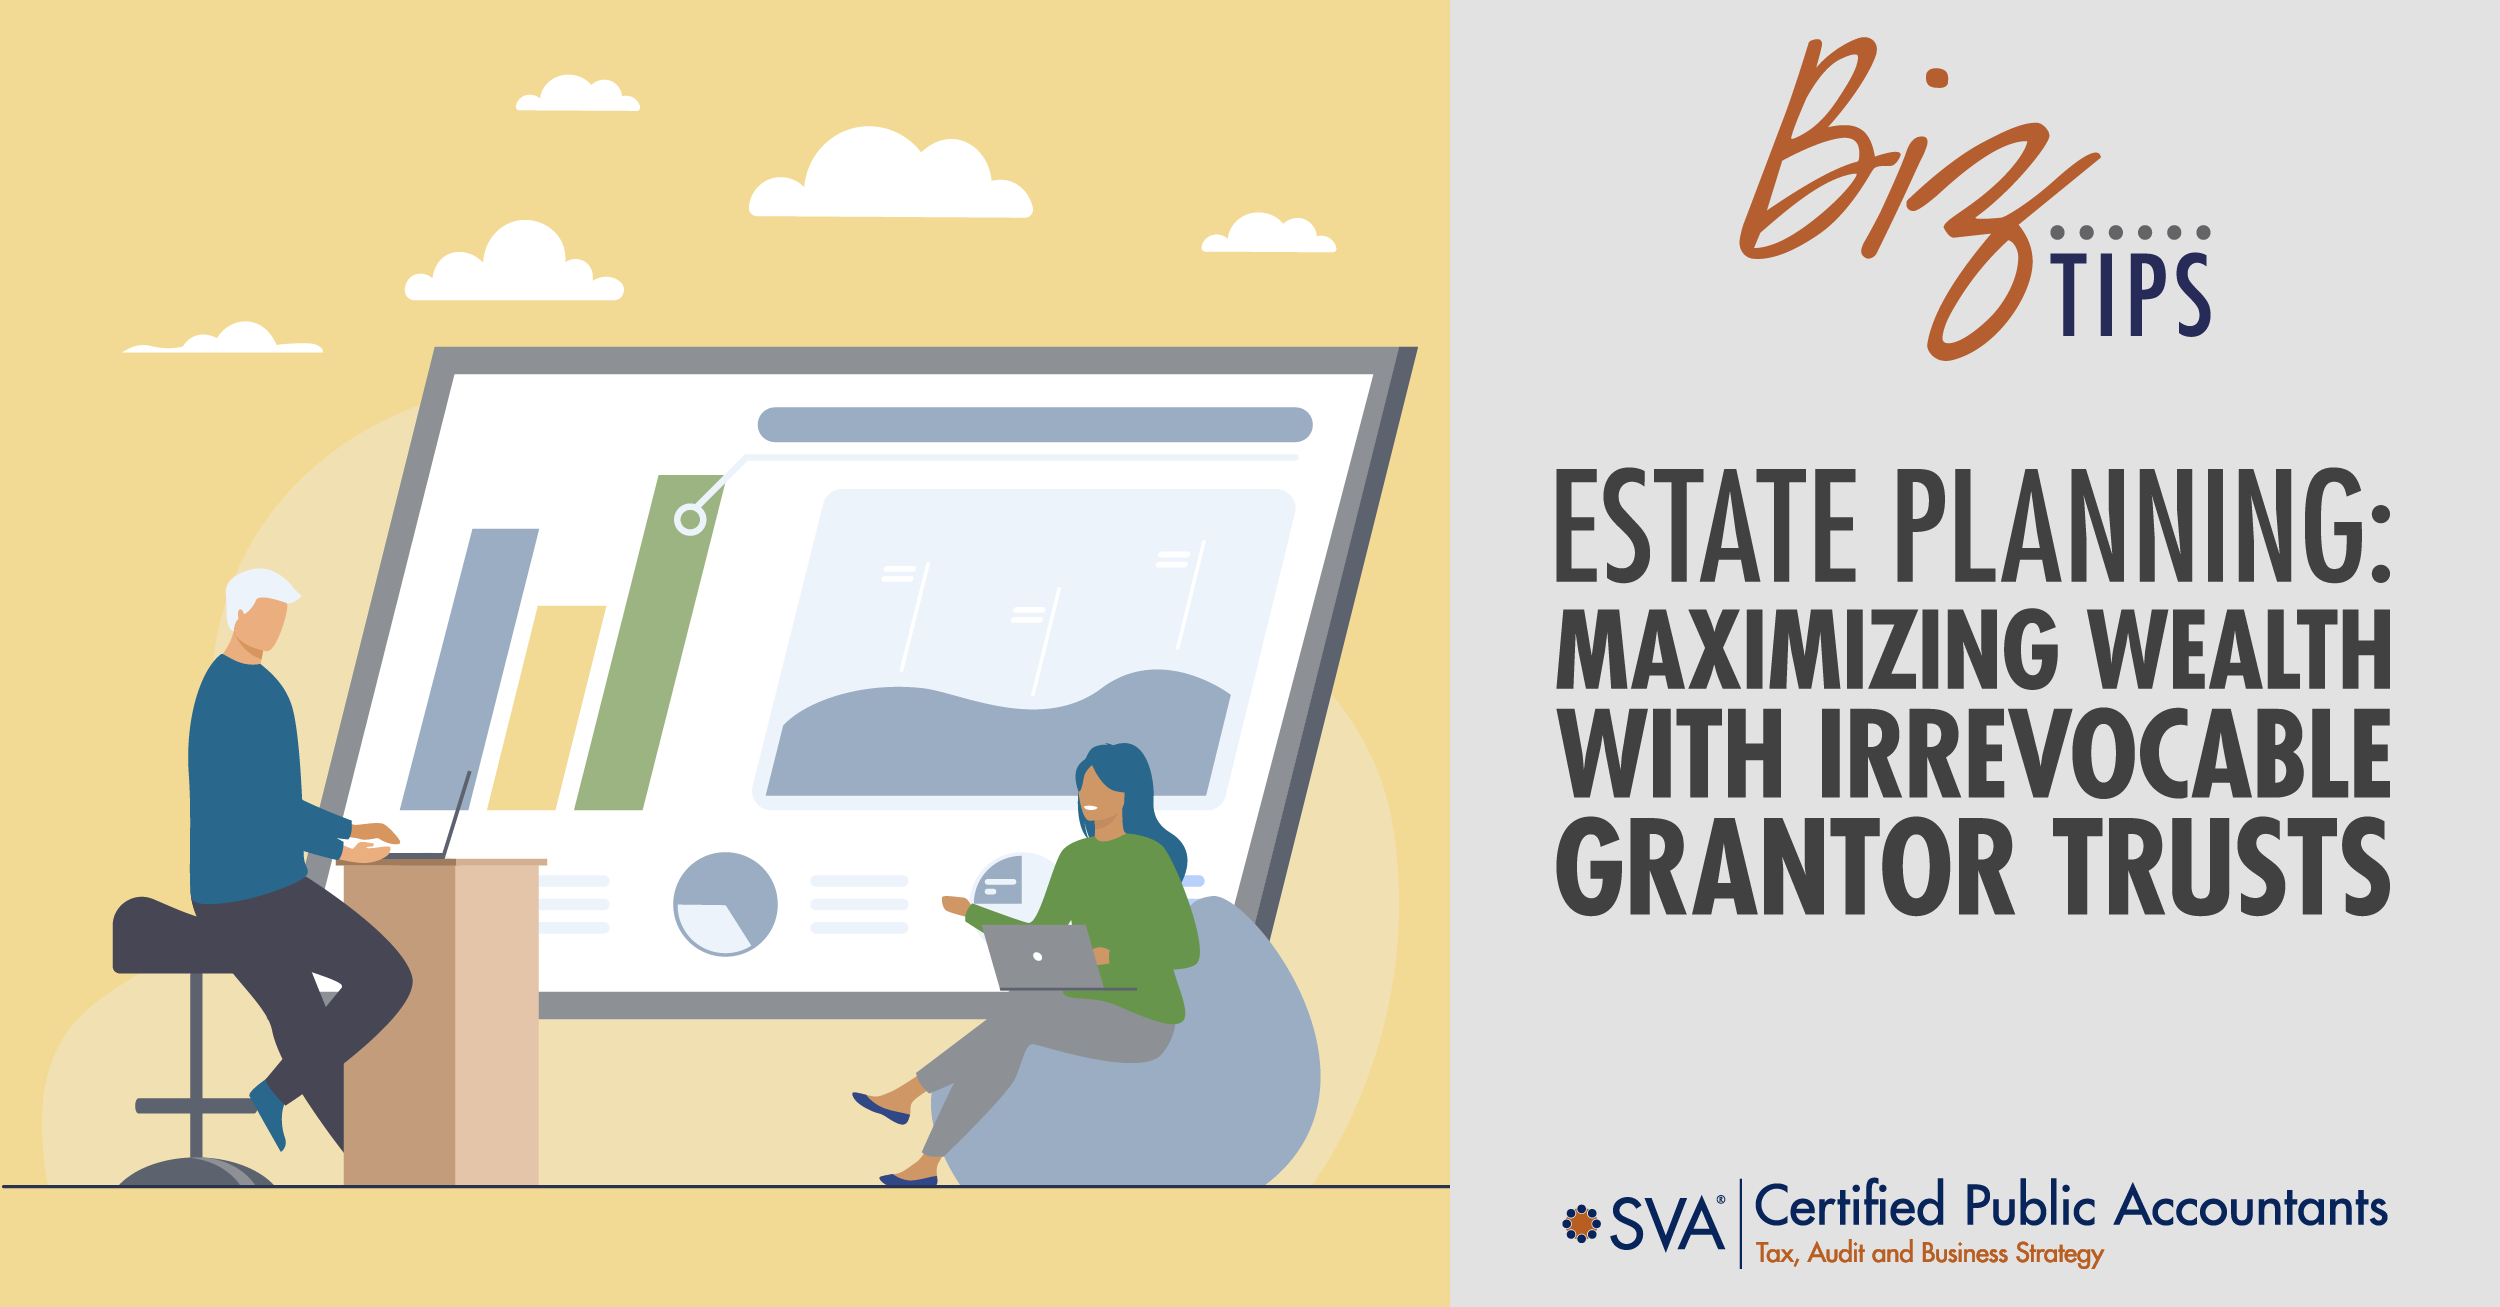 Estate Planning: Maximizing Wealth with Irrevocable Grantor Trusts - Key Benefits and Strategies